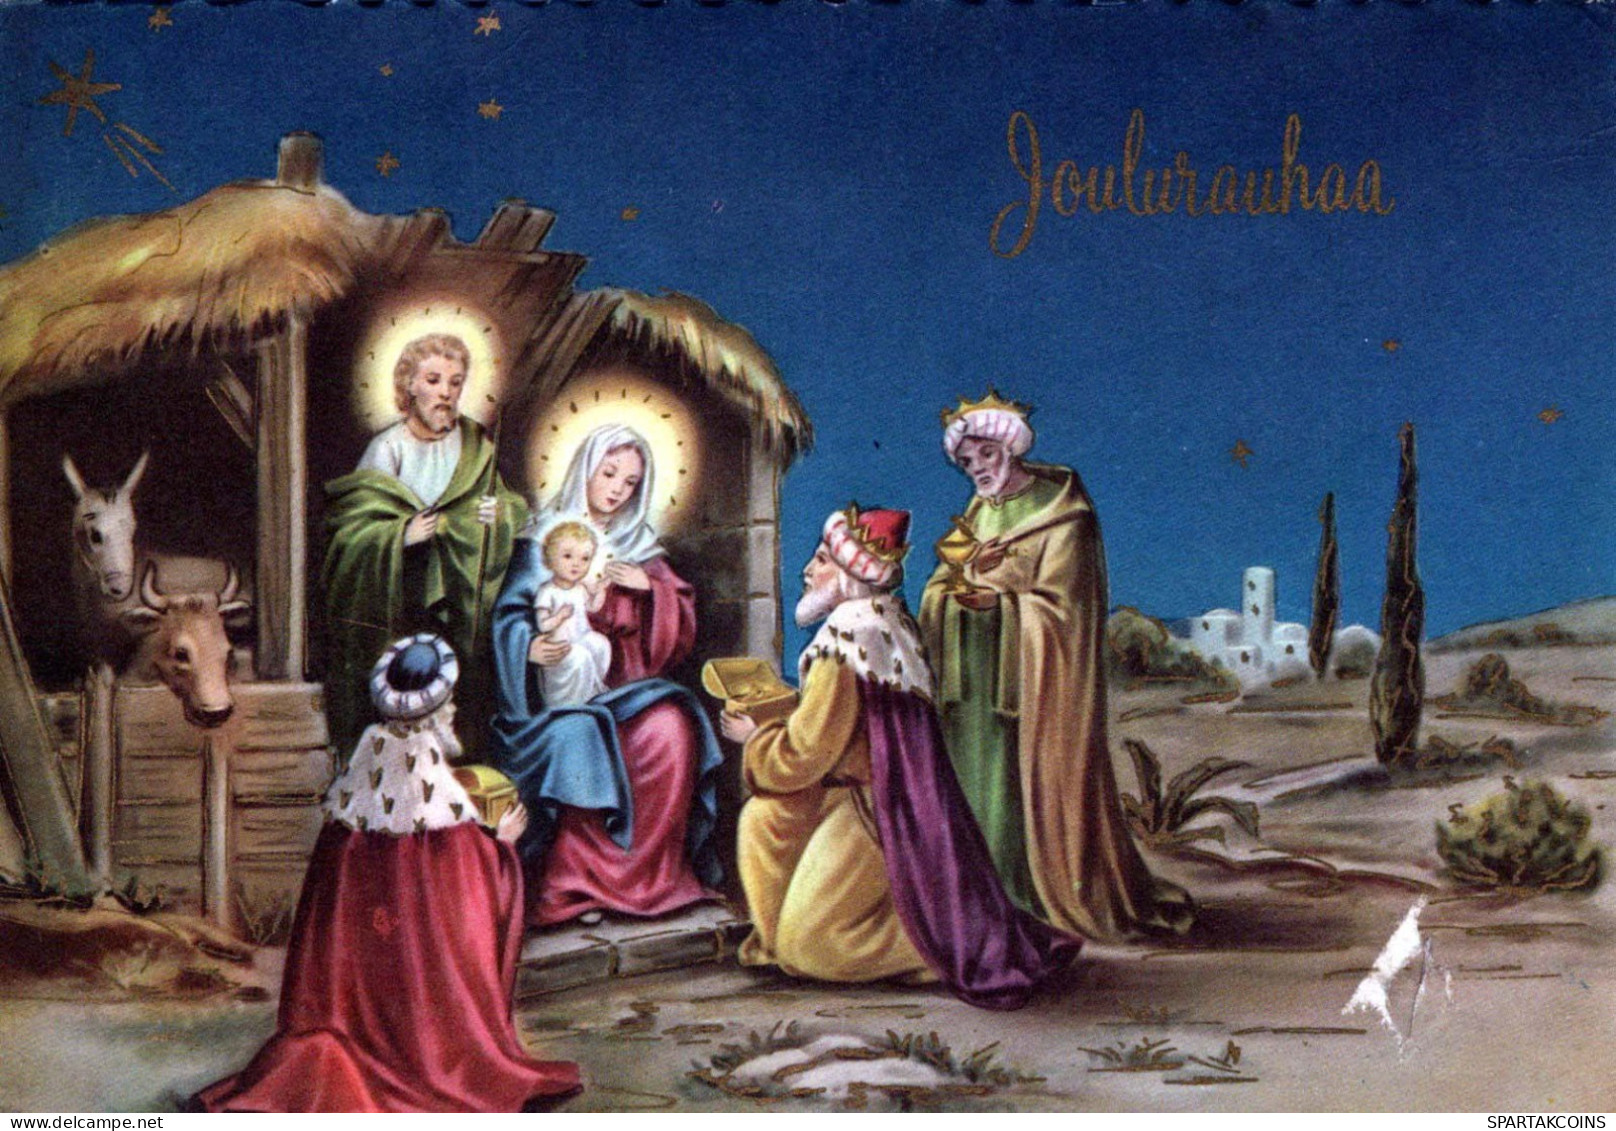 Virgen Mary Madonna Baby JESUS Christmas Religion Vintage Postcard CPSM #PBB617.A - Vierge Marie & Madones